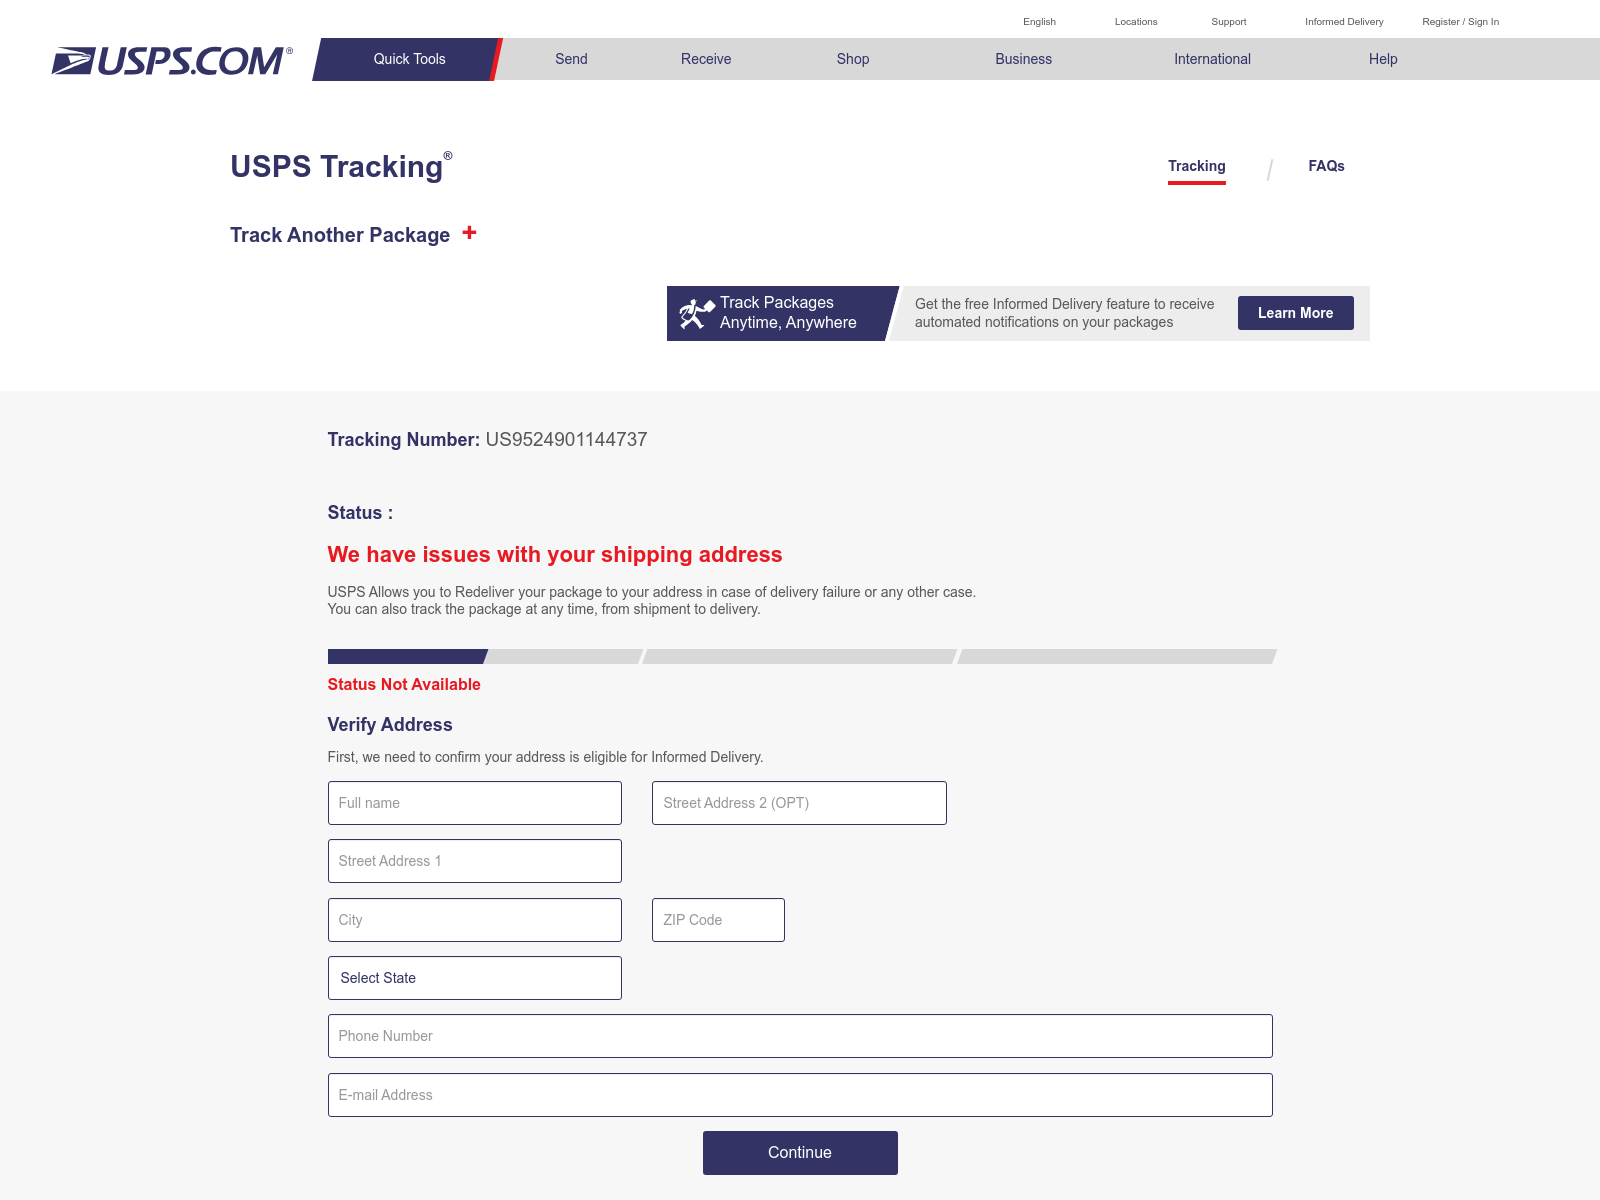 Image 7 is a screenshot of a phishing page impersonating the United States Postal Service website. The layout, typeface, and logos all mimic the legitimate site.